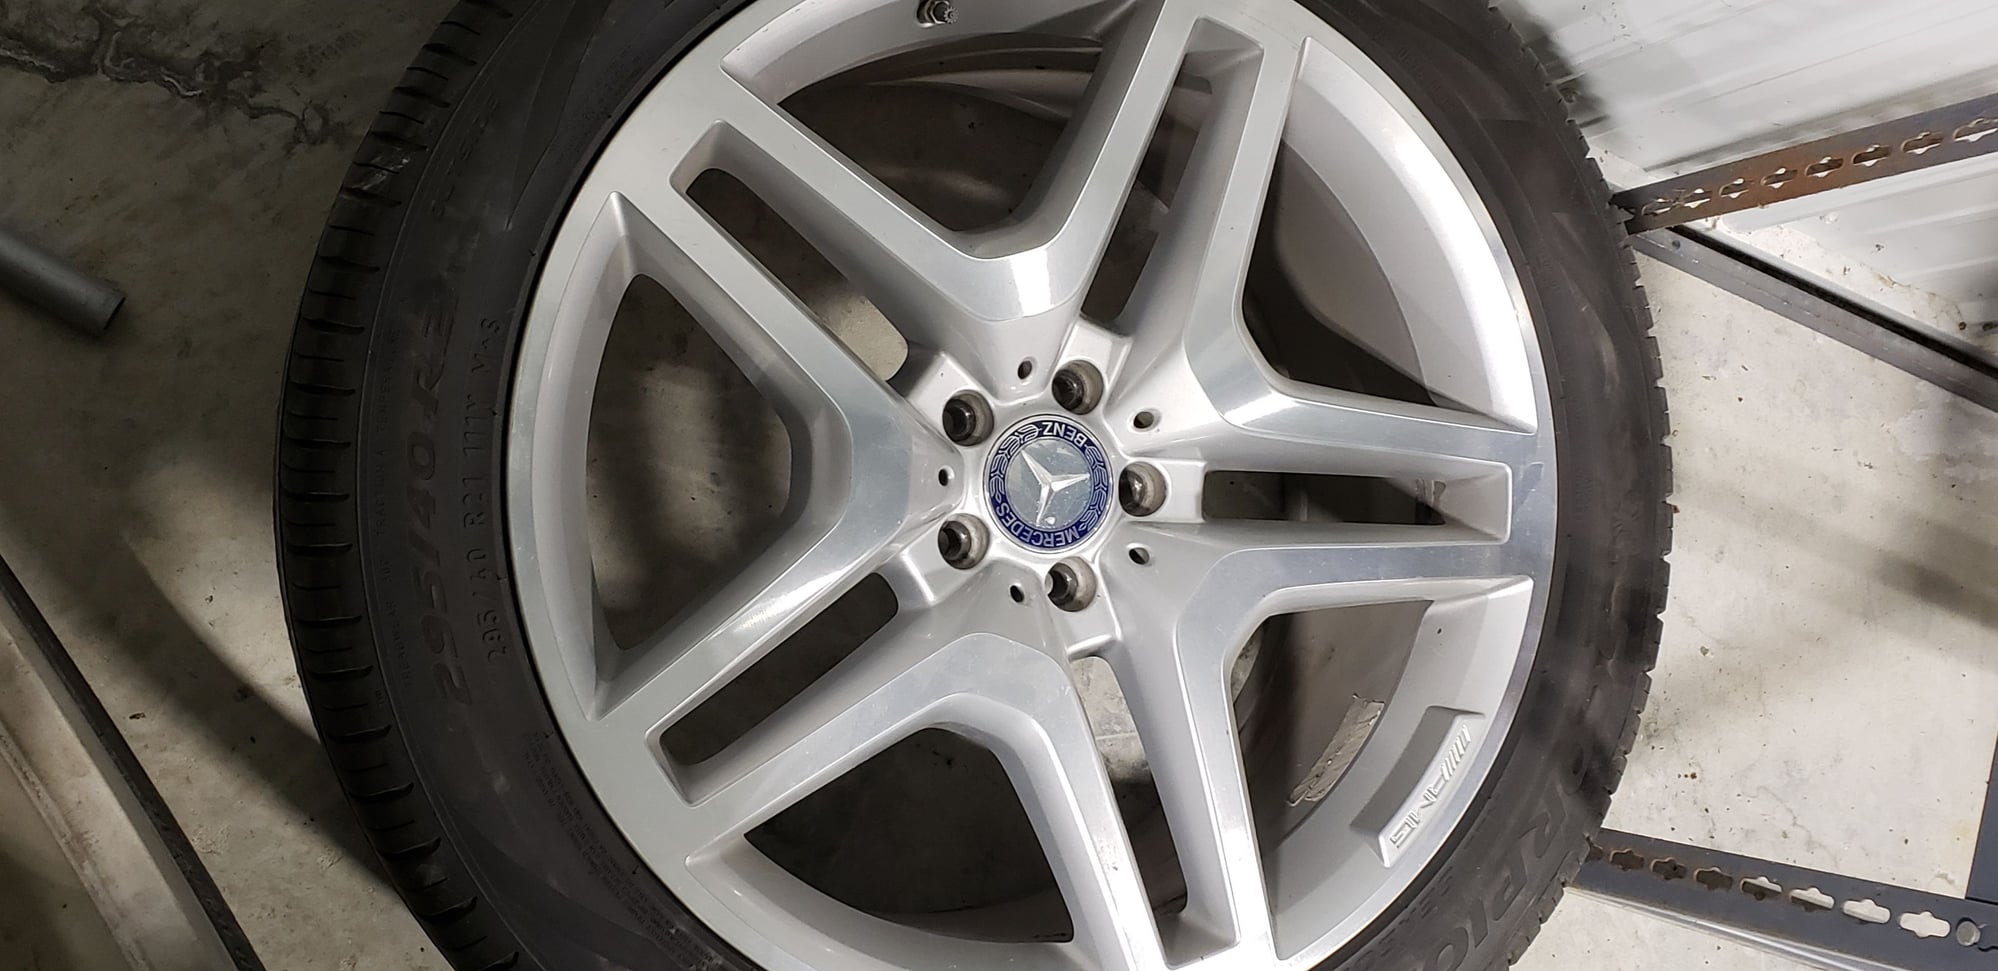 Wheels and Tires/Axles - AMG wheels and tires for sale great condition - Used - 2013 to 2018 Mercedes-Benz GL550 - Winona, MN 55987, United States